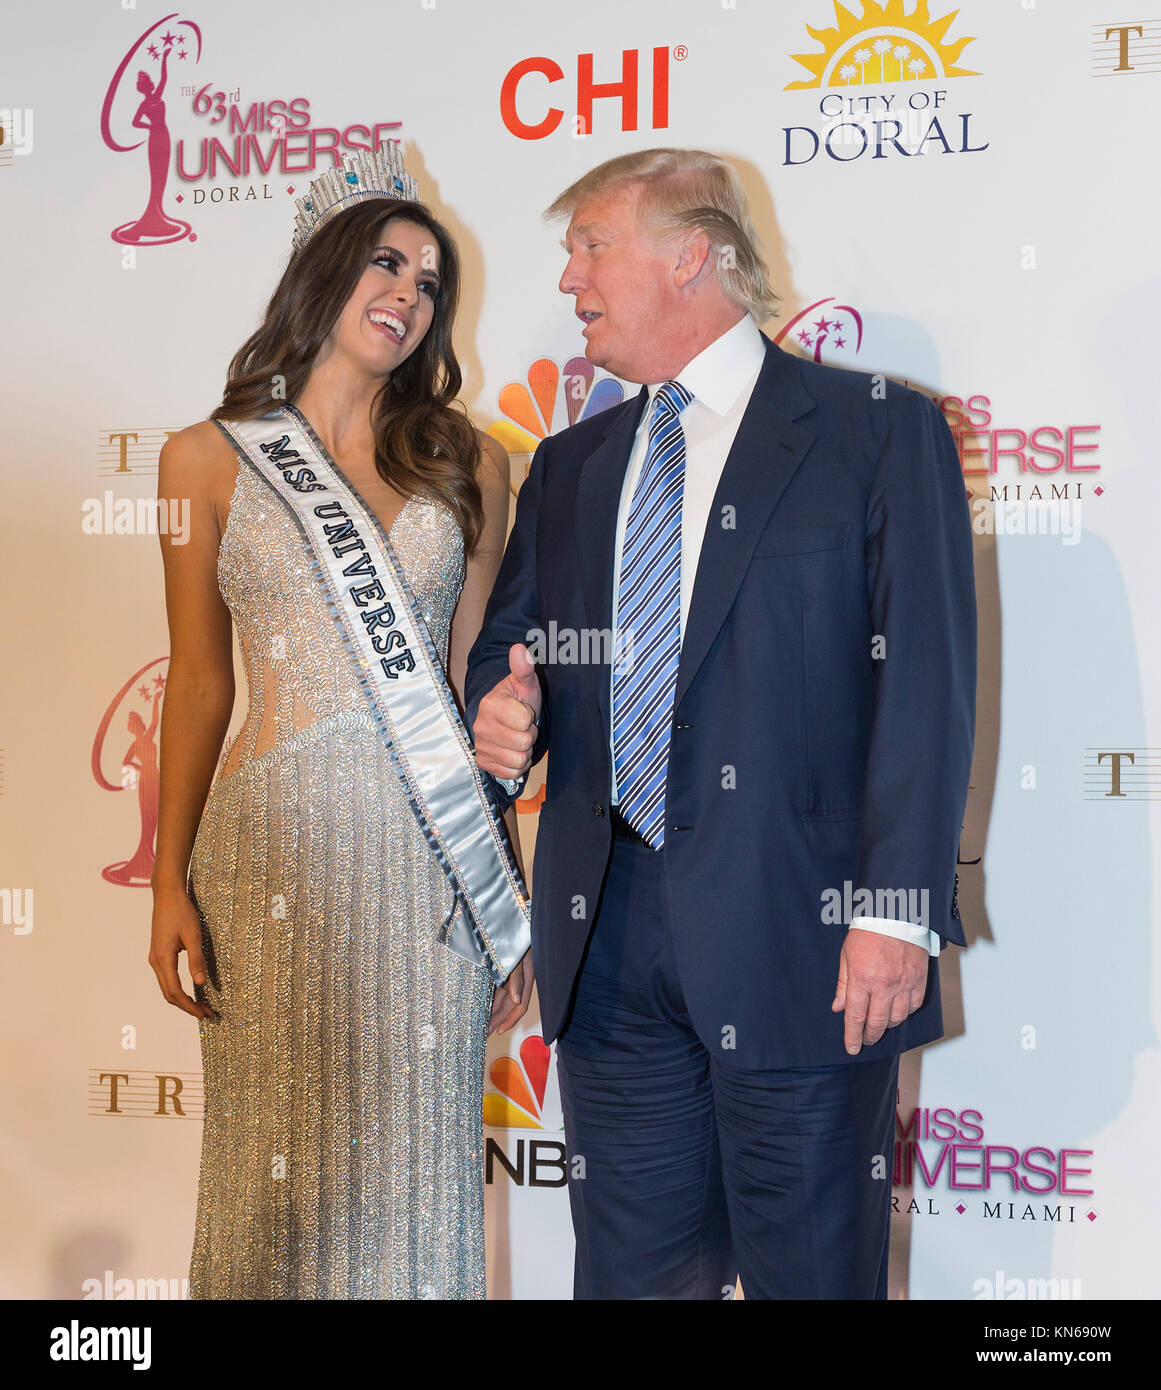 Doral Fl January Donald Trump Poses With Miss Universe